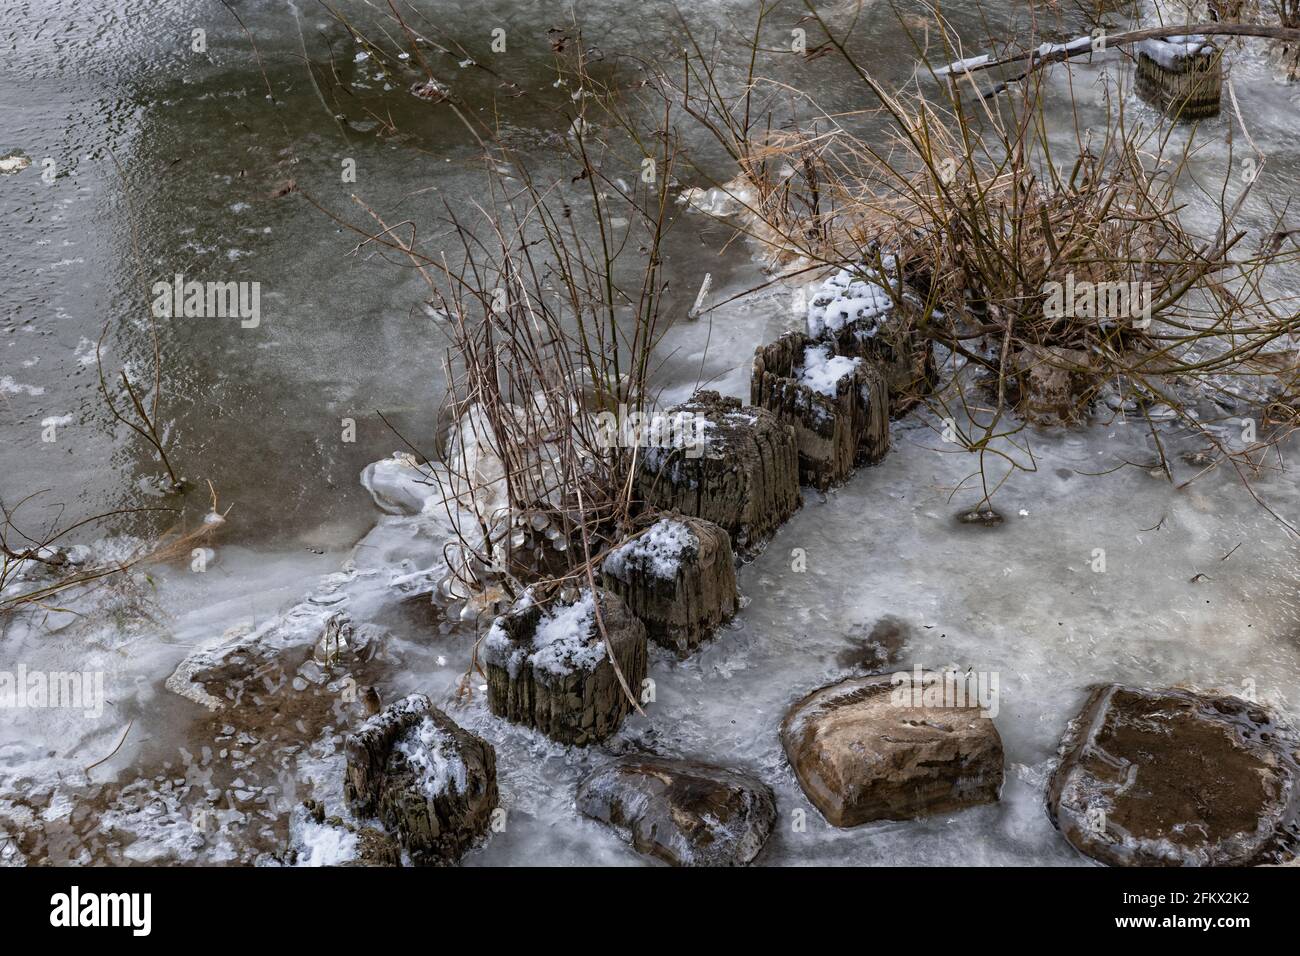 Frozen river with old weathered wooden posts and rocks, winter season abstract background. Stock Photo